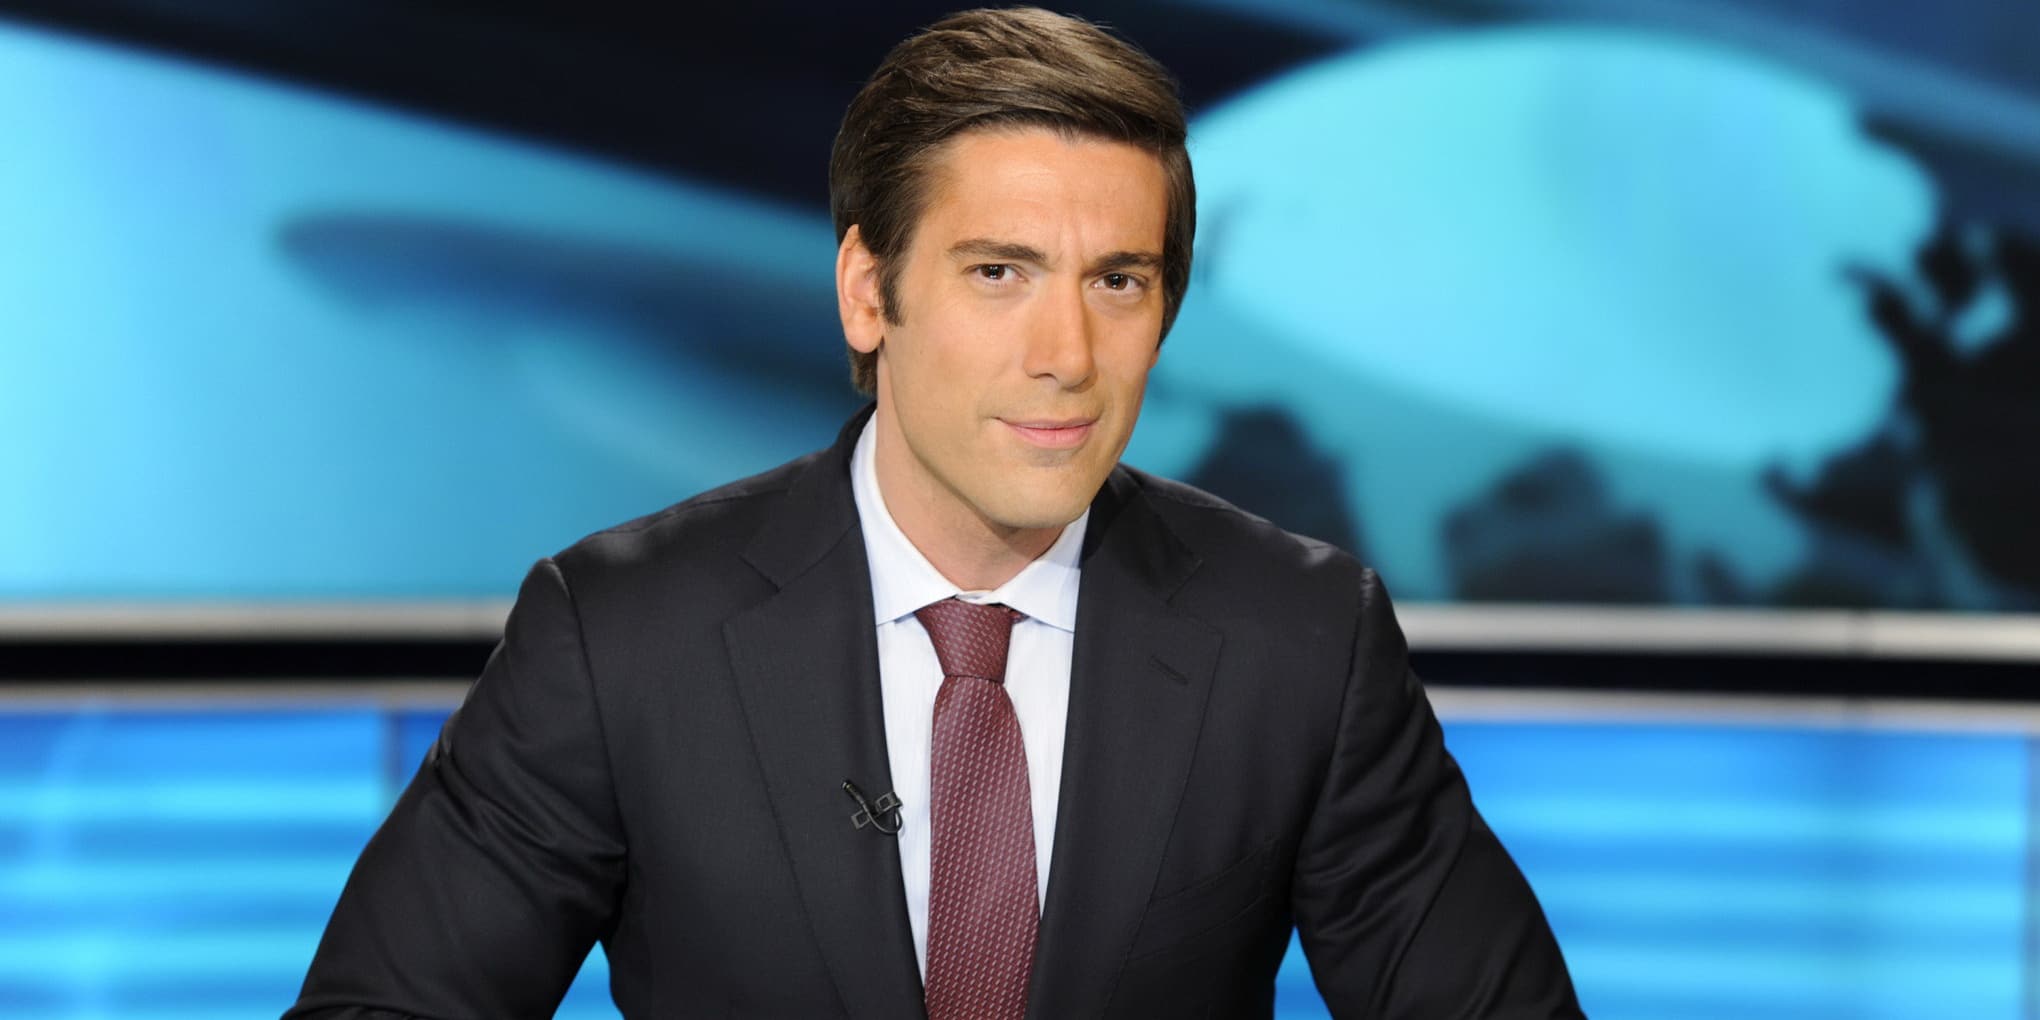 21-extraordinary-facts-about-david-muir